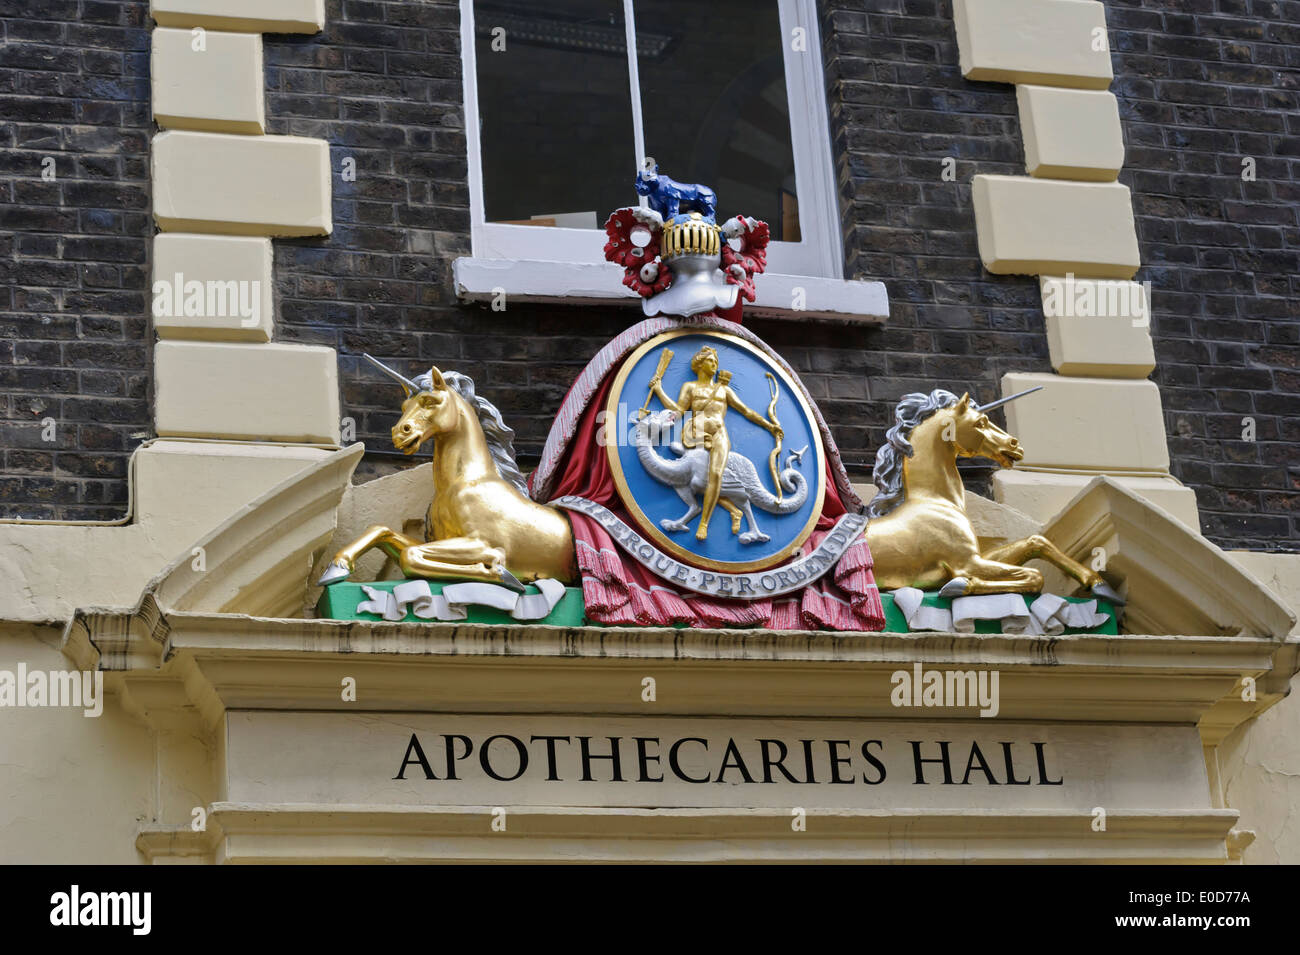 Unicorns and Code of Arms above the entrance of Apothecaries' Hall, London, England, United Kingdom. Stock Photo